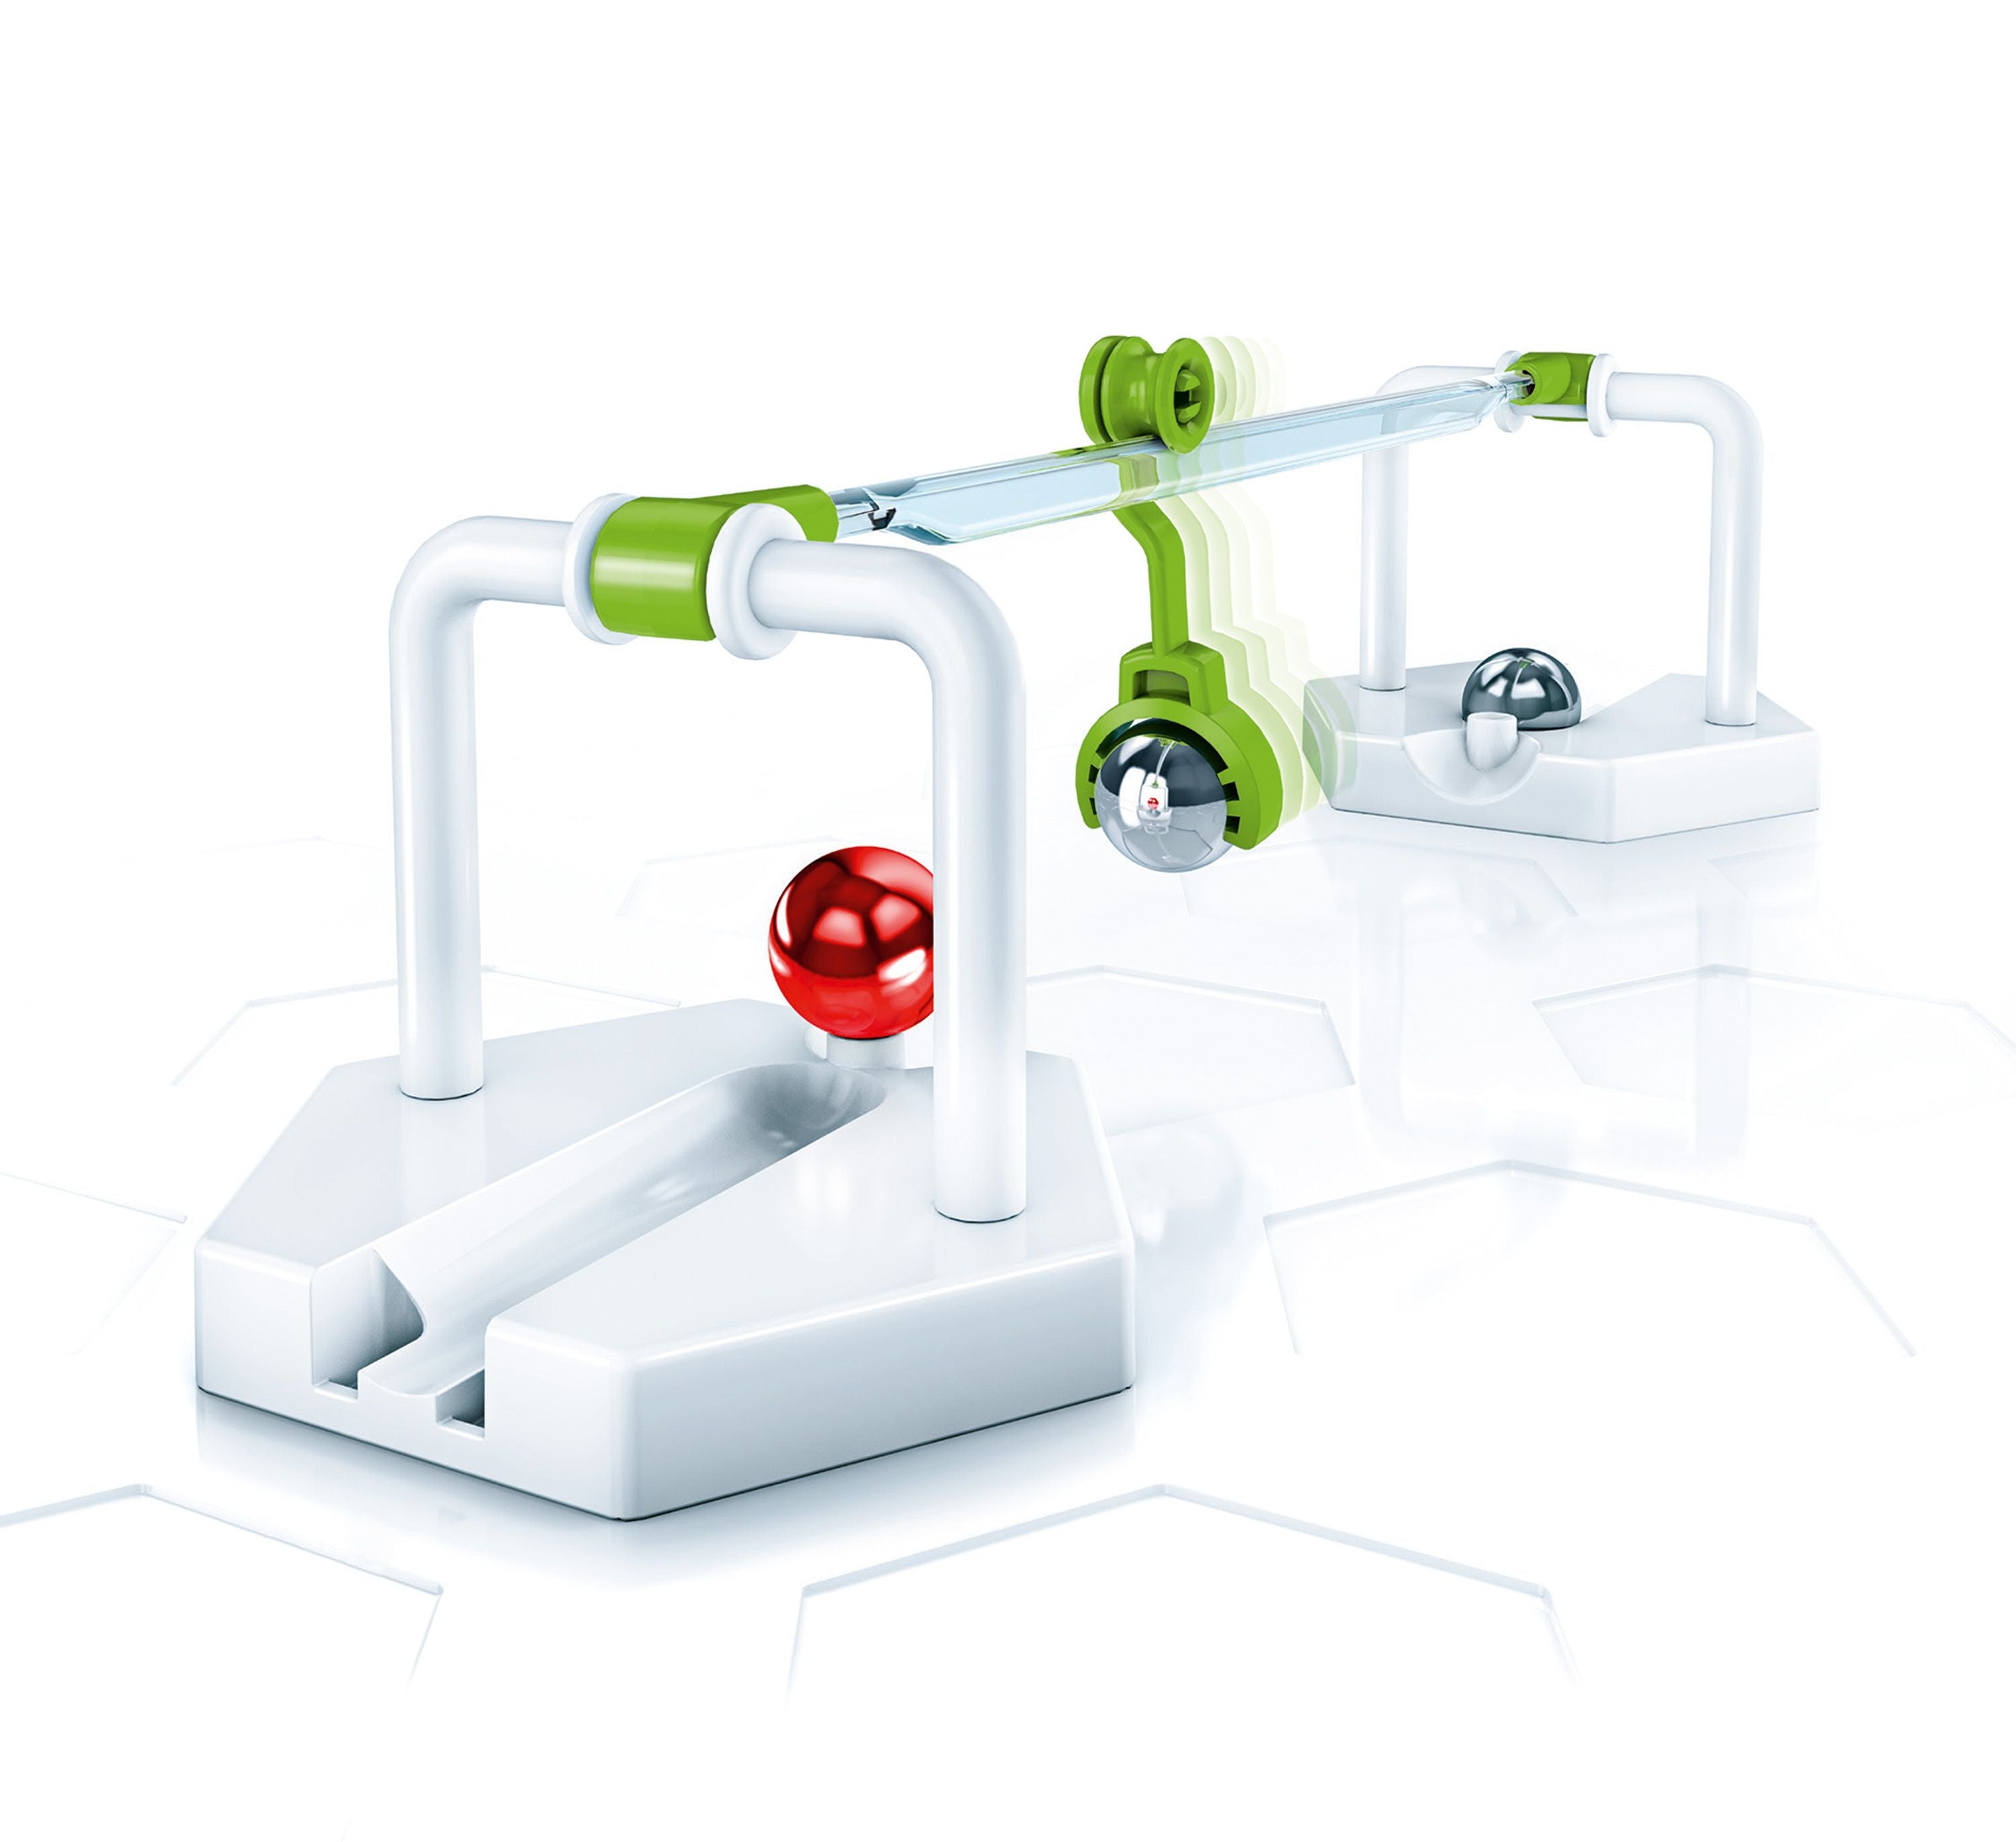 product view - gravitrax stem toy - stem construction toy